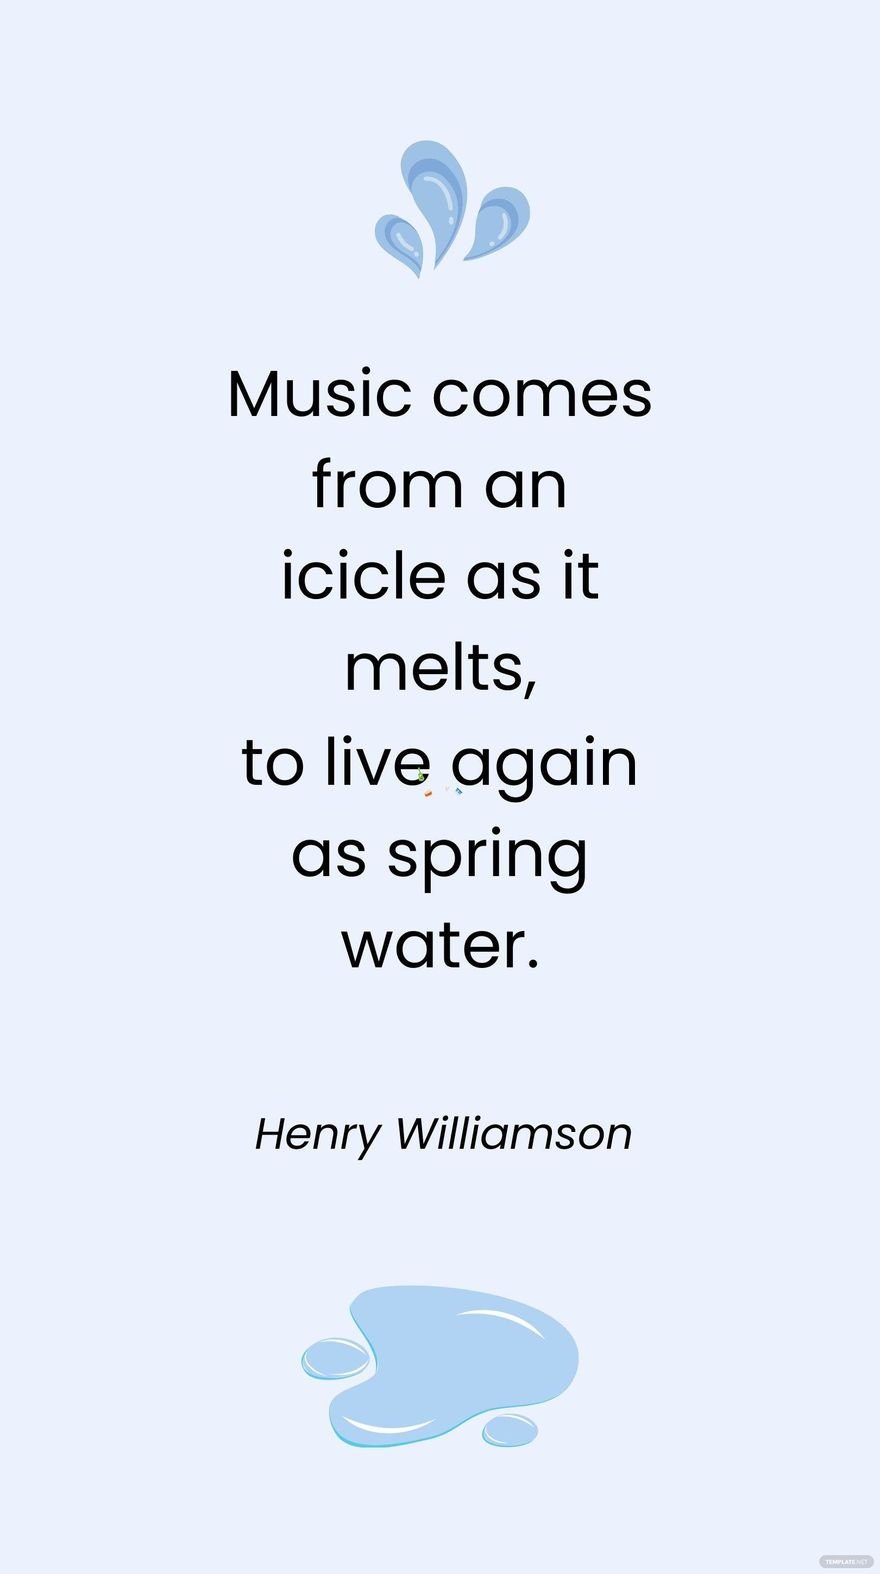 Henry Williamson - Music comes from an icicle as it melts, to live again as spring water.